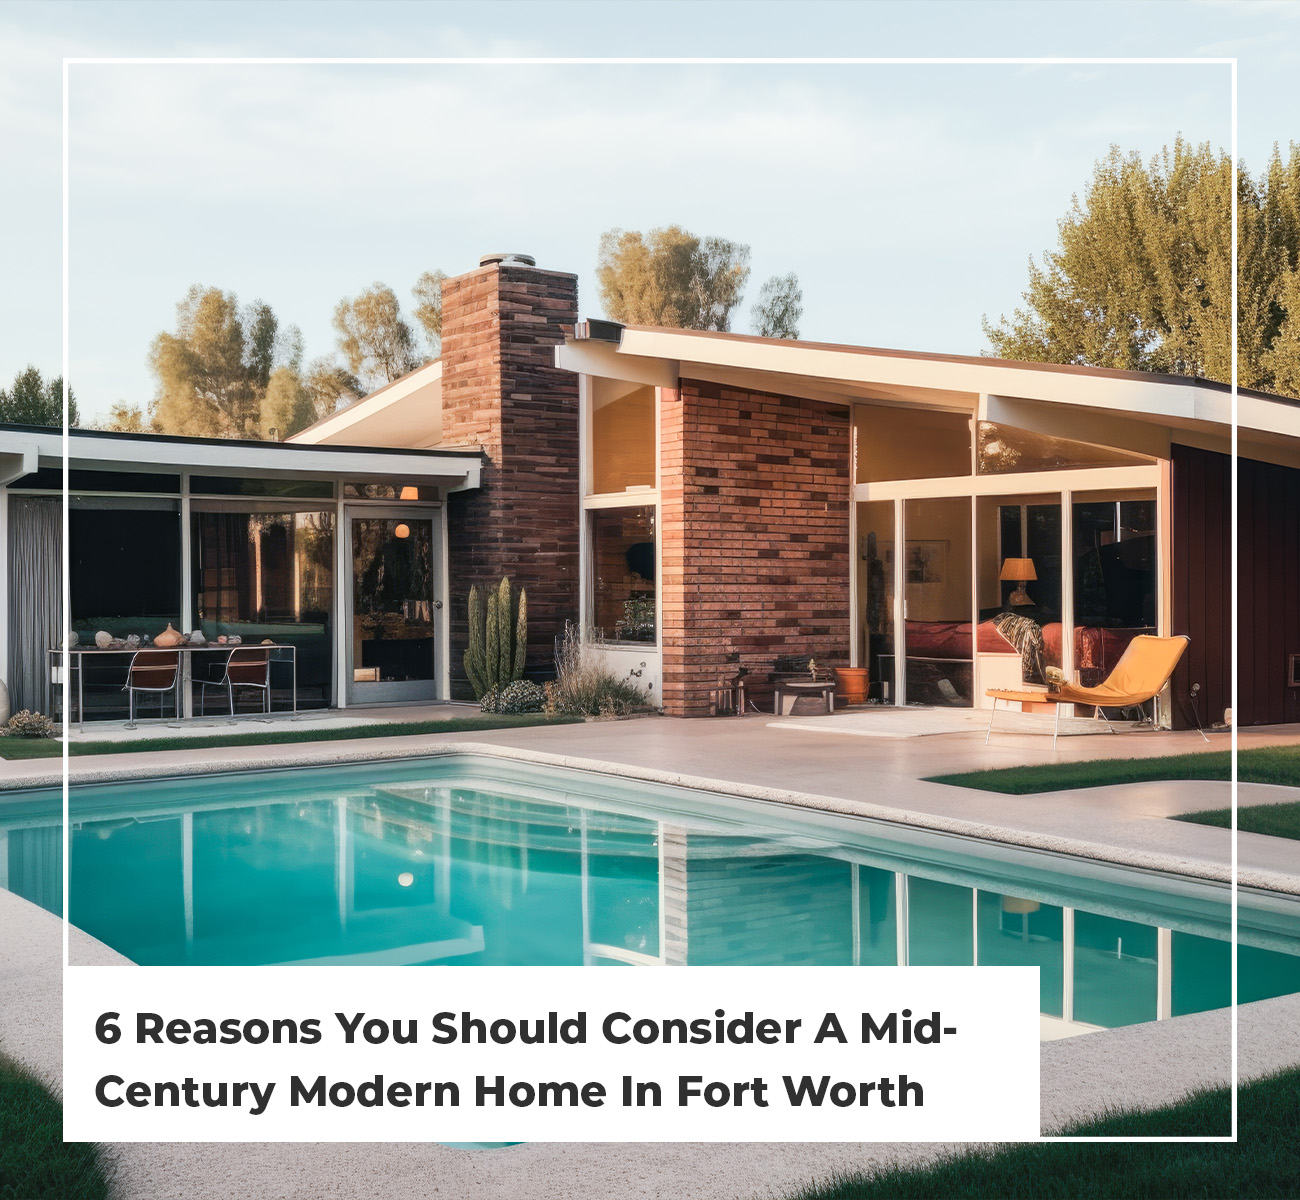 6 Reasons You Should Consider A Mid-Century Modern Home In Fort Worth